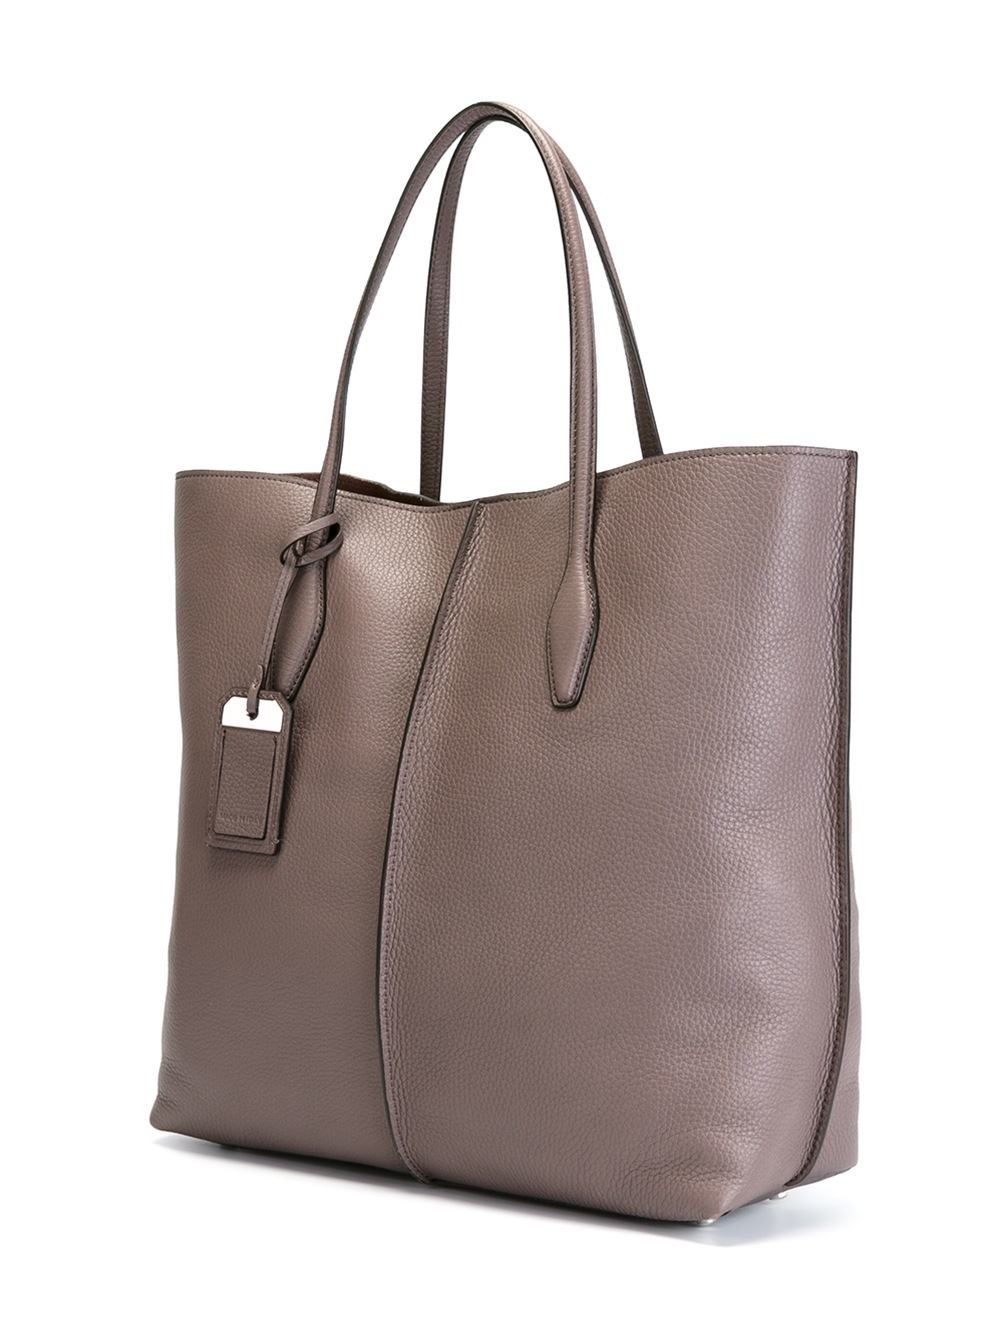 Tod's 'd-bow' Shopper Tote in Gray (GREY) | Lyst